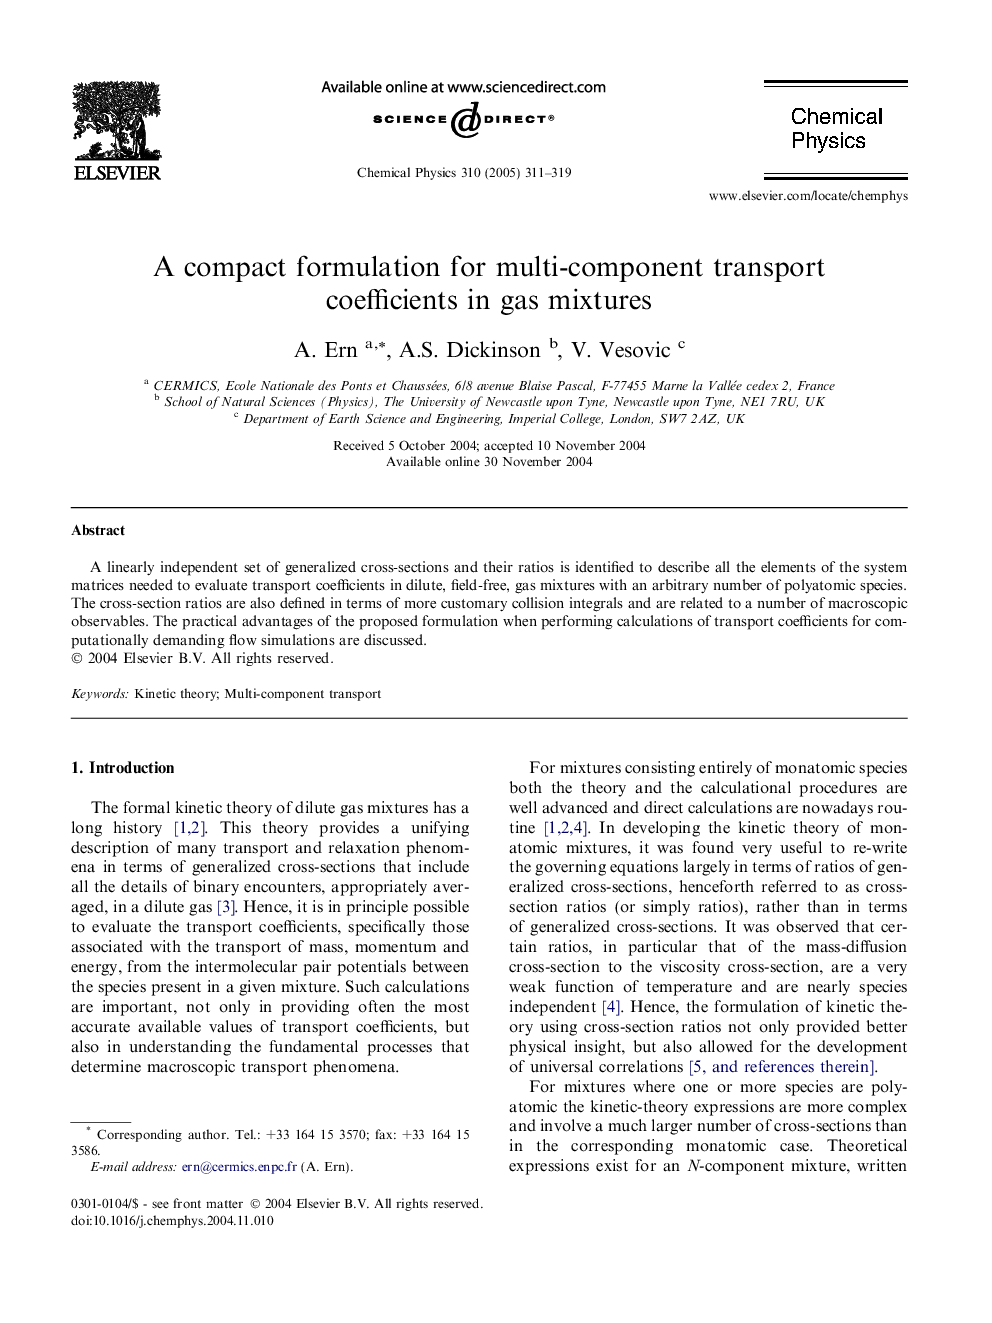 A compact formulation for multi-component transport coefficients in gas mixtures